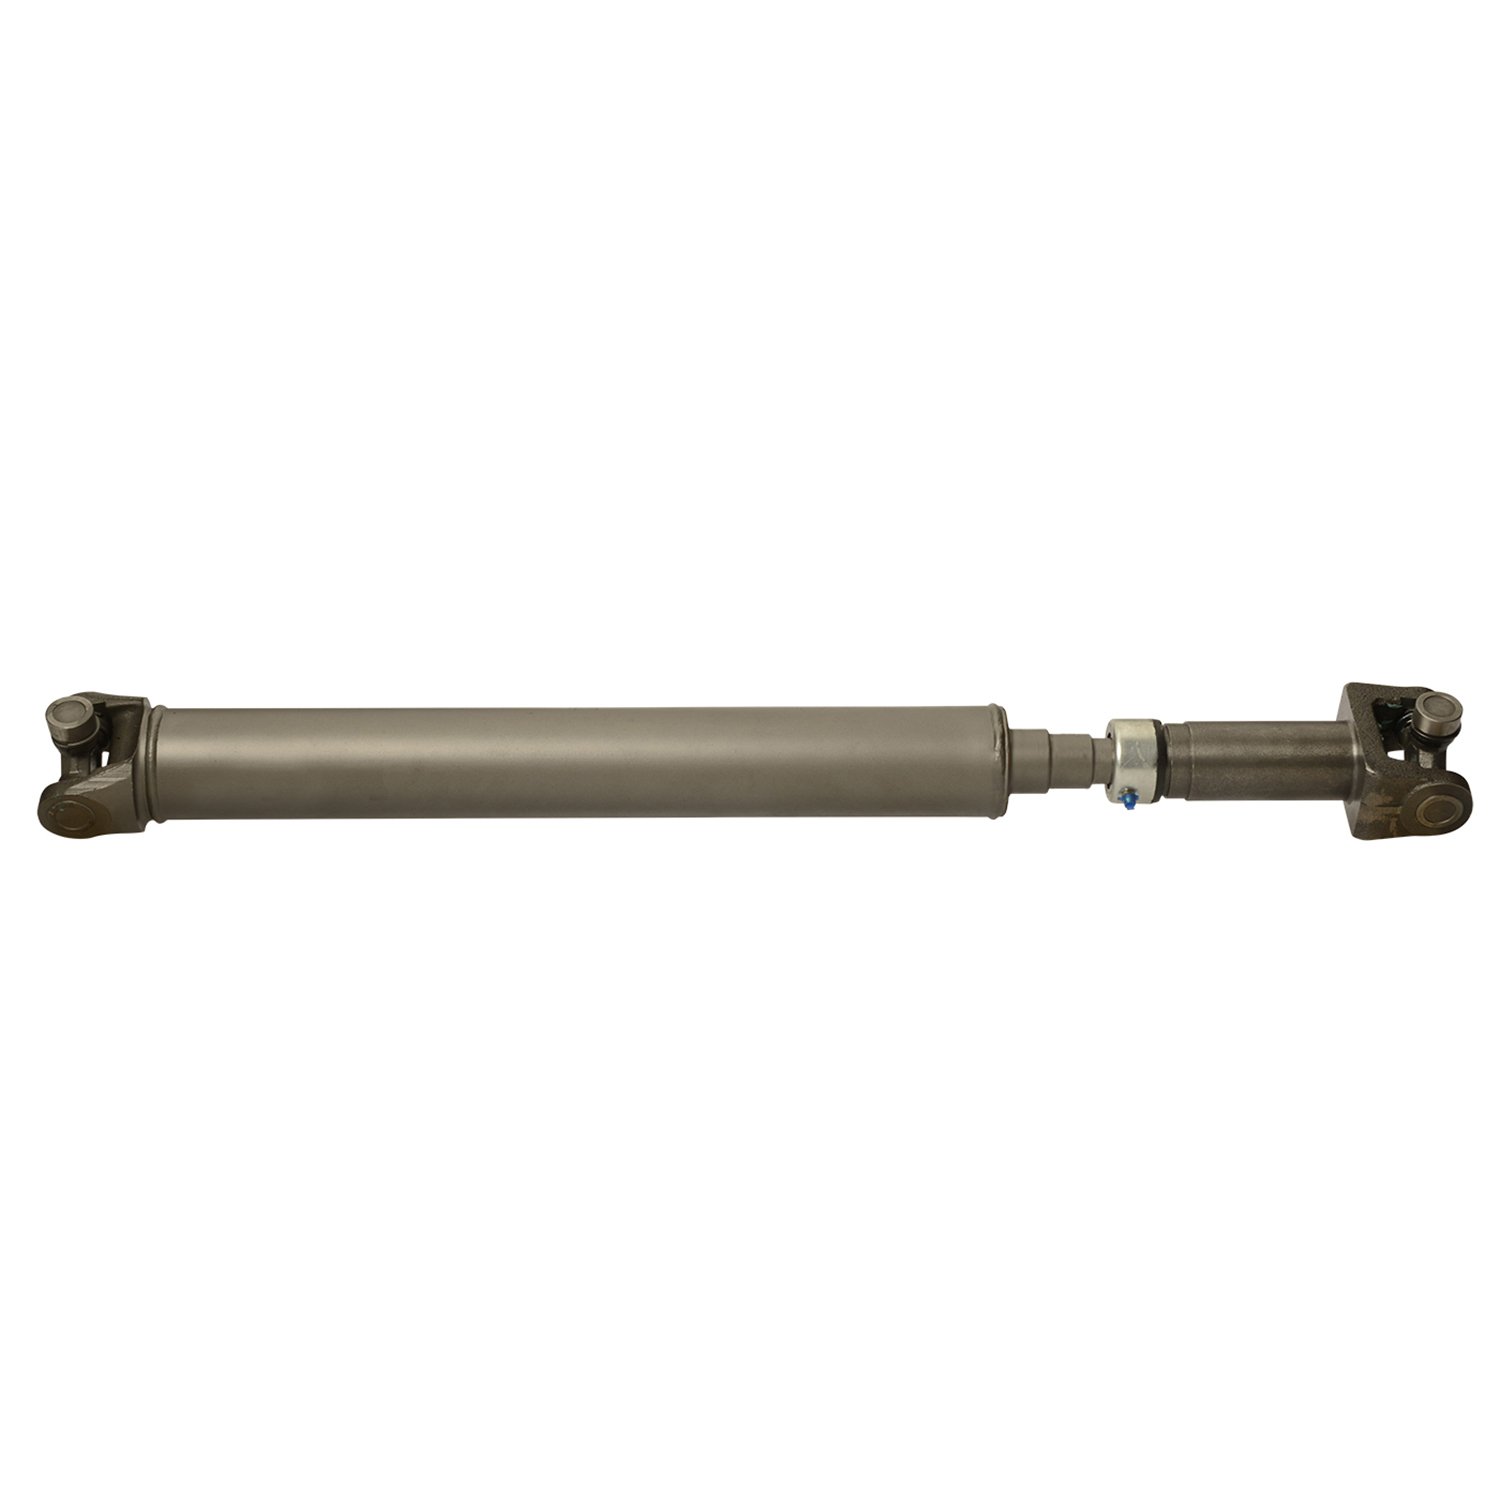 USA Standard ZDS9440 Front Driveshaft, For Bronco/F-Series Trucks, 35.5 in. Center-To-Center